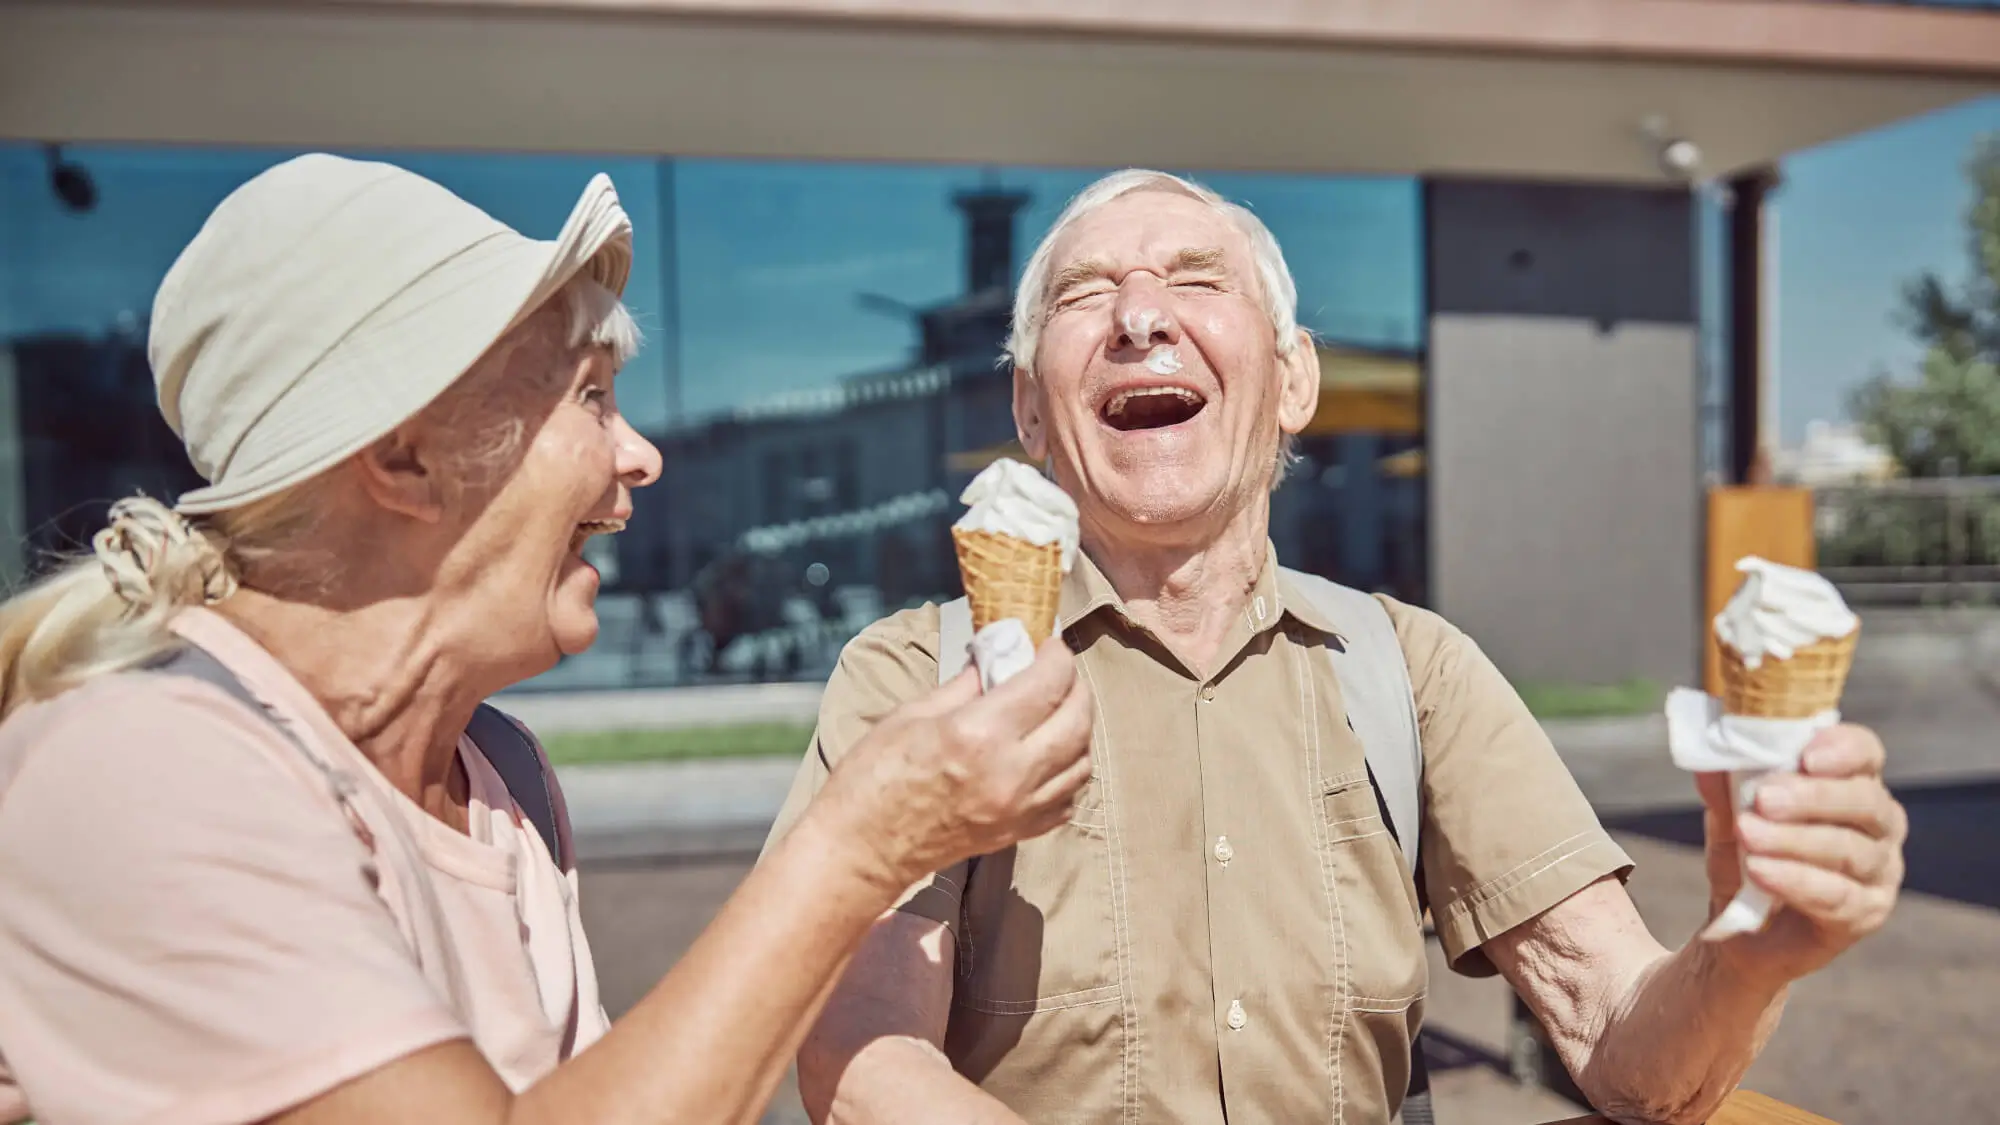 Cheerful married elderly couple with vanilla ice cream waffle cones laughing heartily at the table